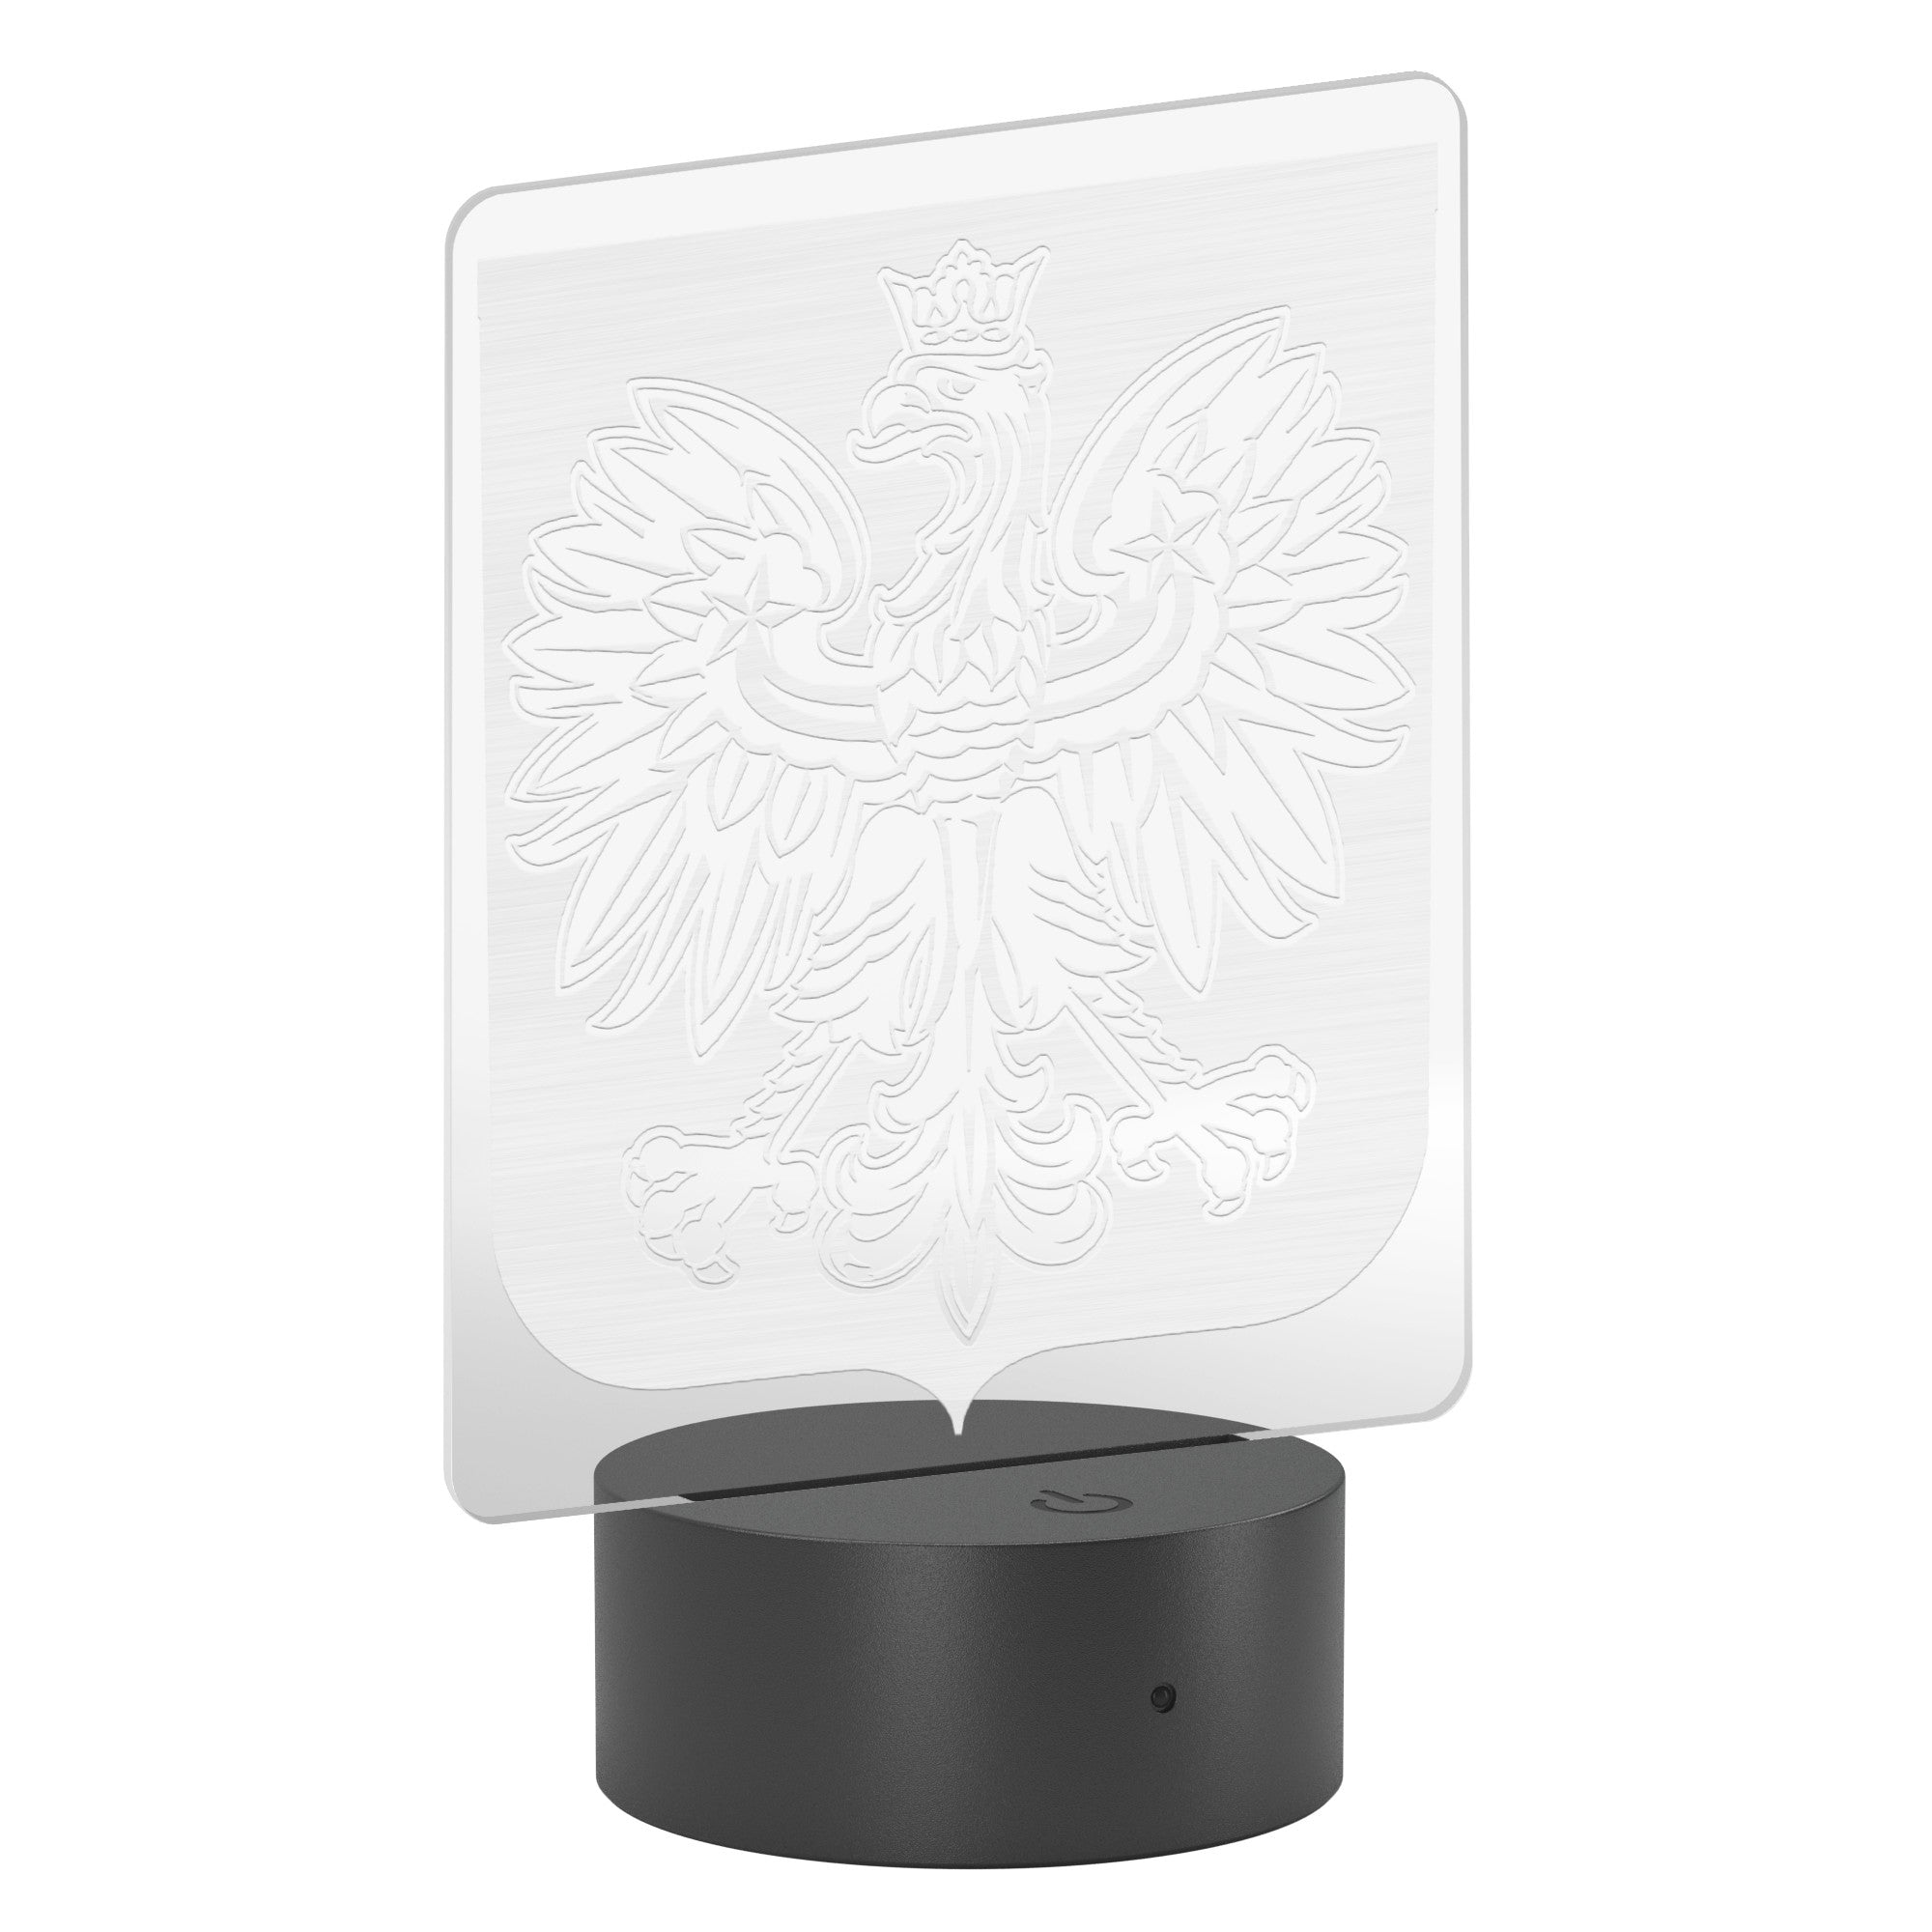 Poland Coat of Arms Rectangle Acrylic LED Sign LED Signs teelaunch   